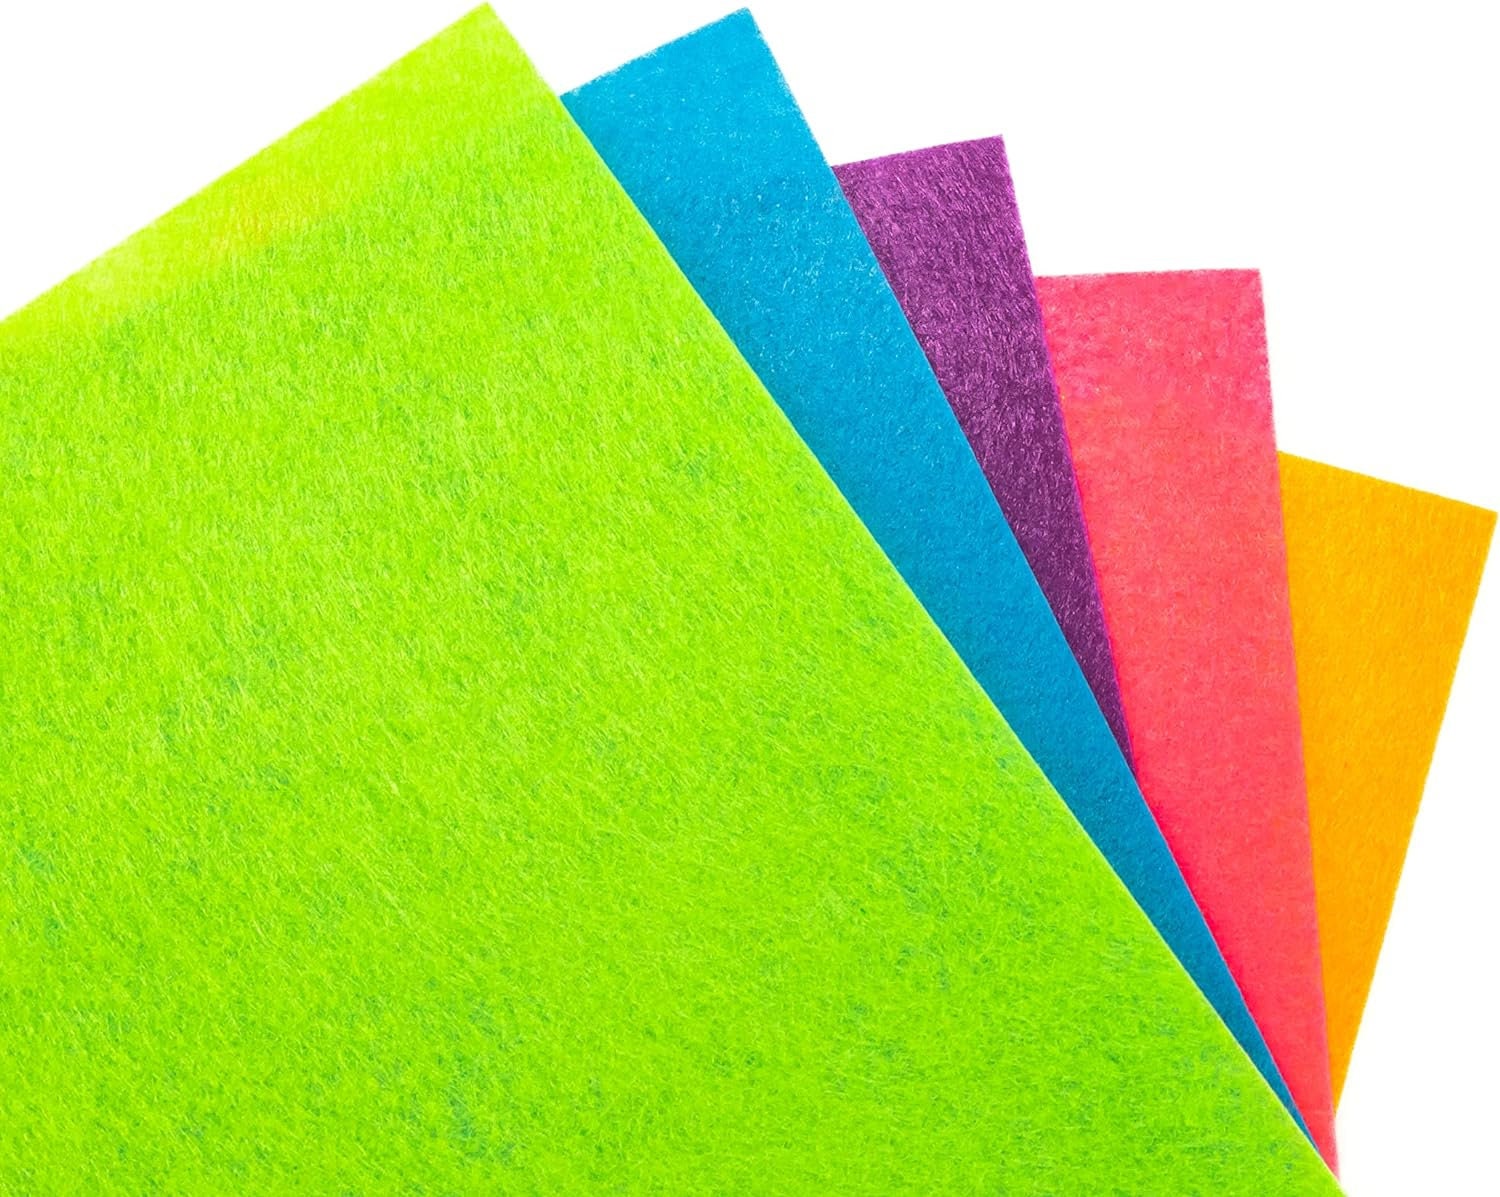 Incraftables Felt Sheets for Crafts 30 Pieces. Best Colored Felt